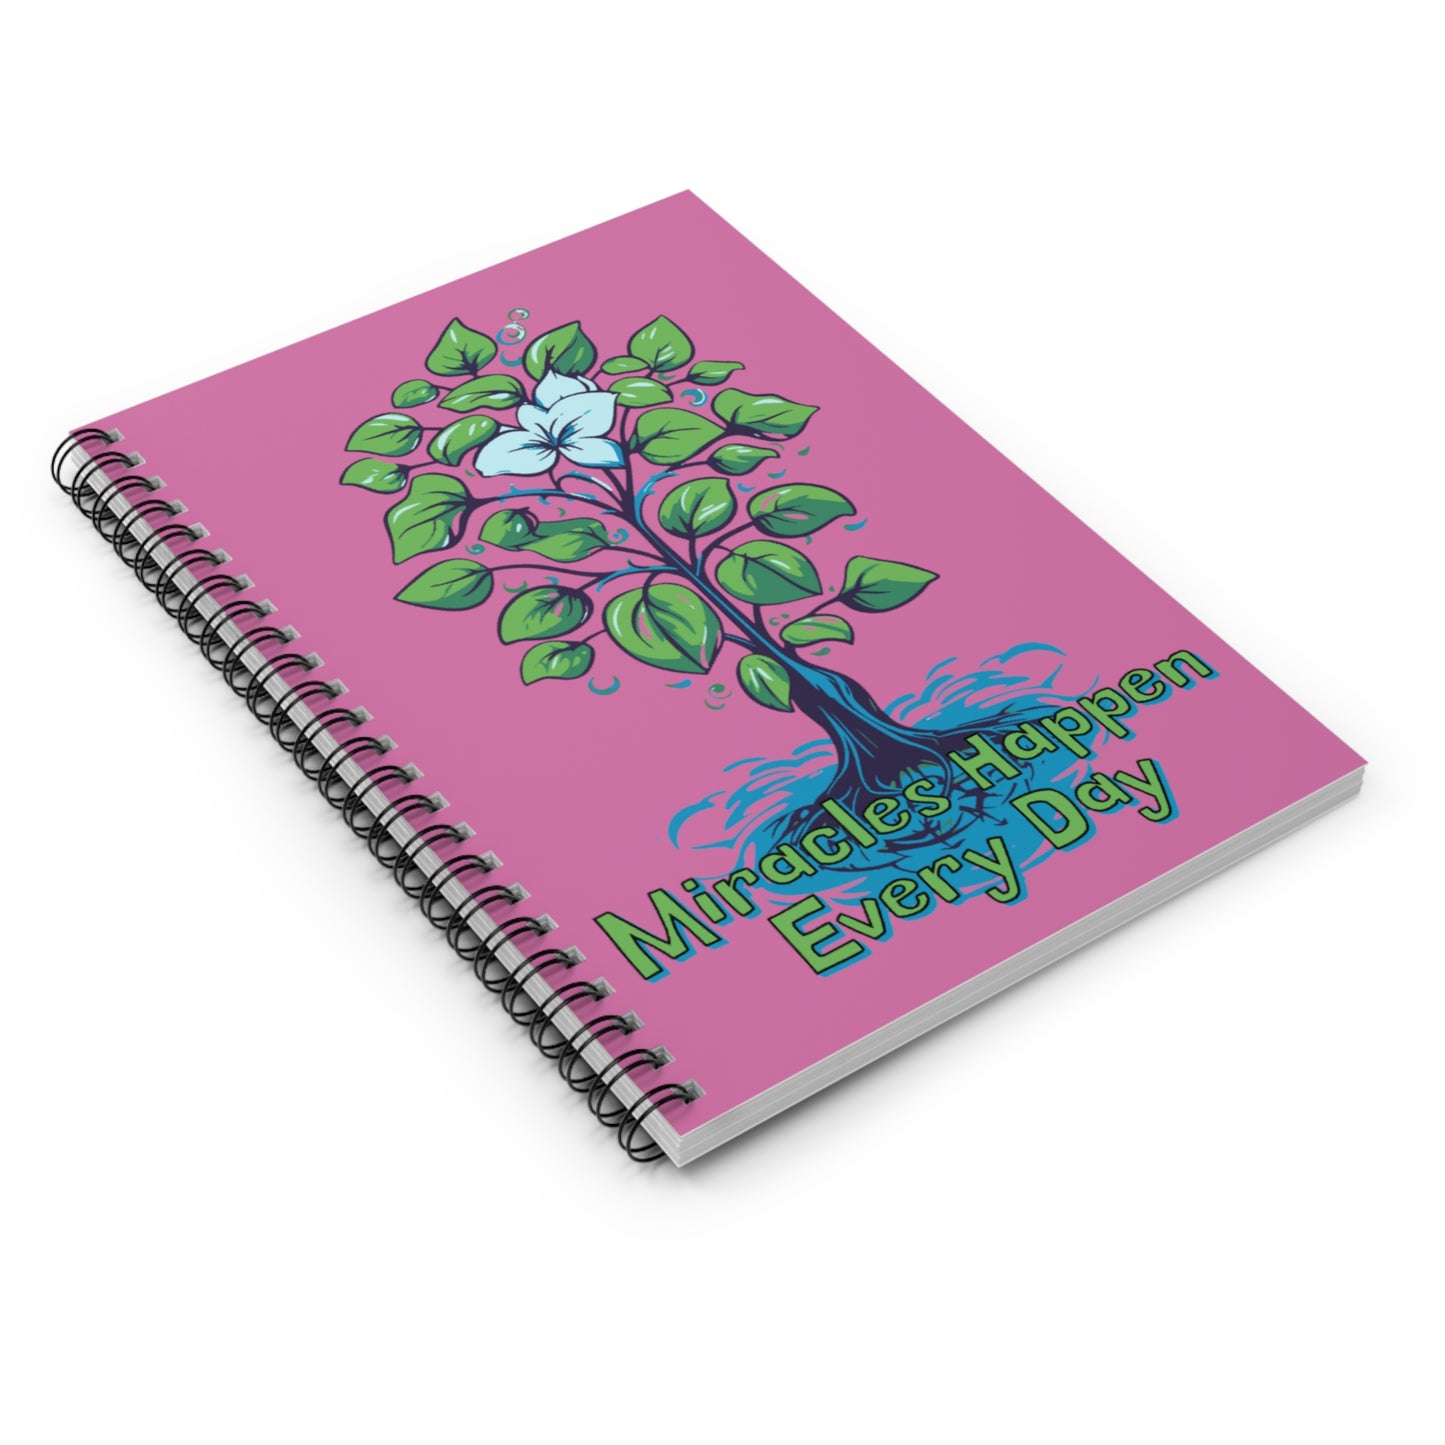 Miracles Happen Every Day | Spiral Notebook - Ruled Line